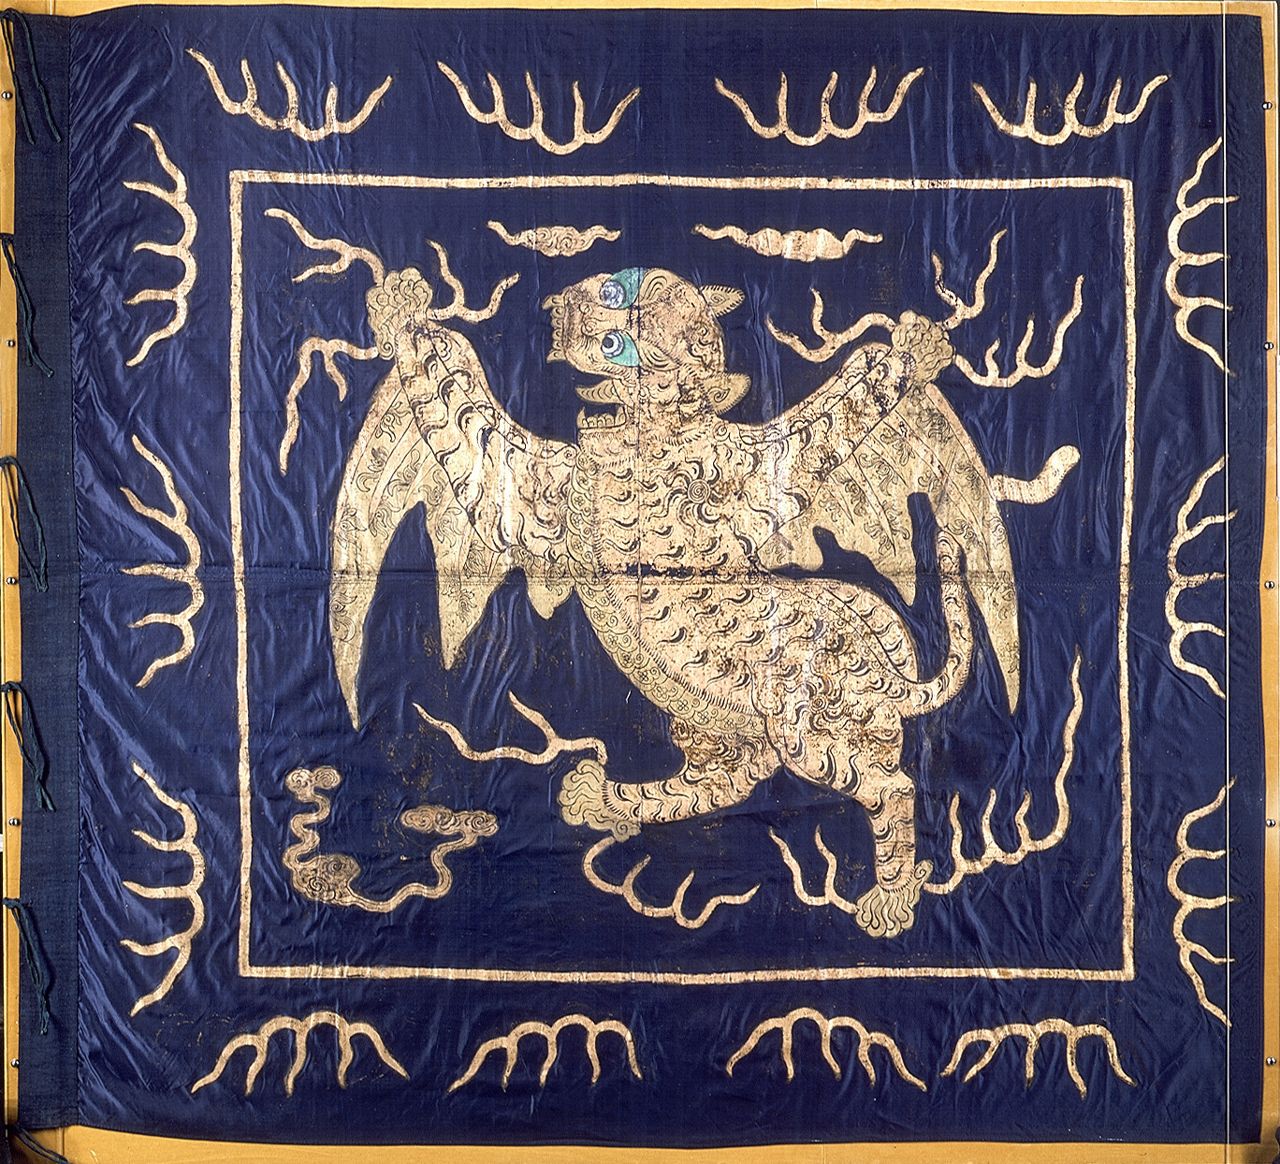 This ornate Imperial Chinese flag is made from silk and features a winged tiger crafted in gold foil. The mythical creature with wild green eyes holds flashes of lightning in its claws.<br />"In terms of aesthetics, this is probably my favorite flag in the collection," Davey says of the intricate textile, which is one of the few <a href="http://collections.rmg.co.uk/collections/objects/559.html" target="_blank" target="_blank">now on display to the public.</a> "It was taken during the capture of Canton in 1857."  <br />